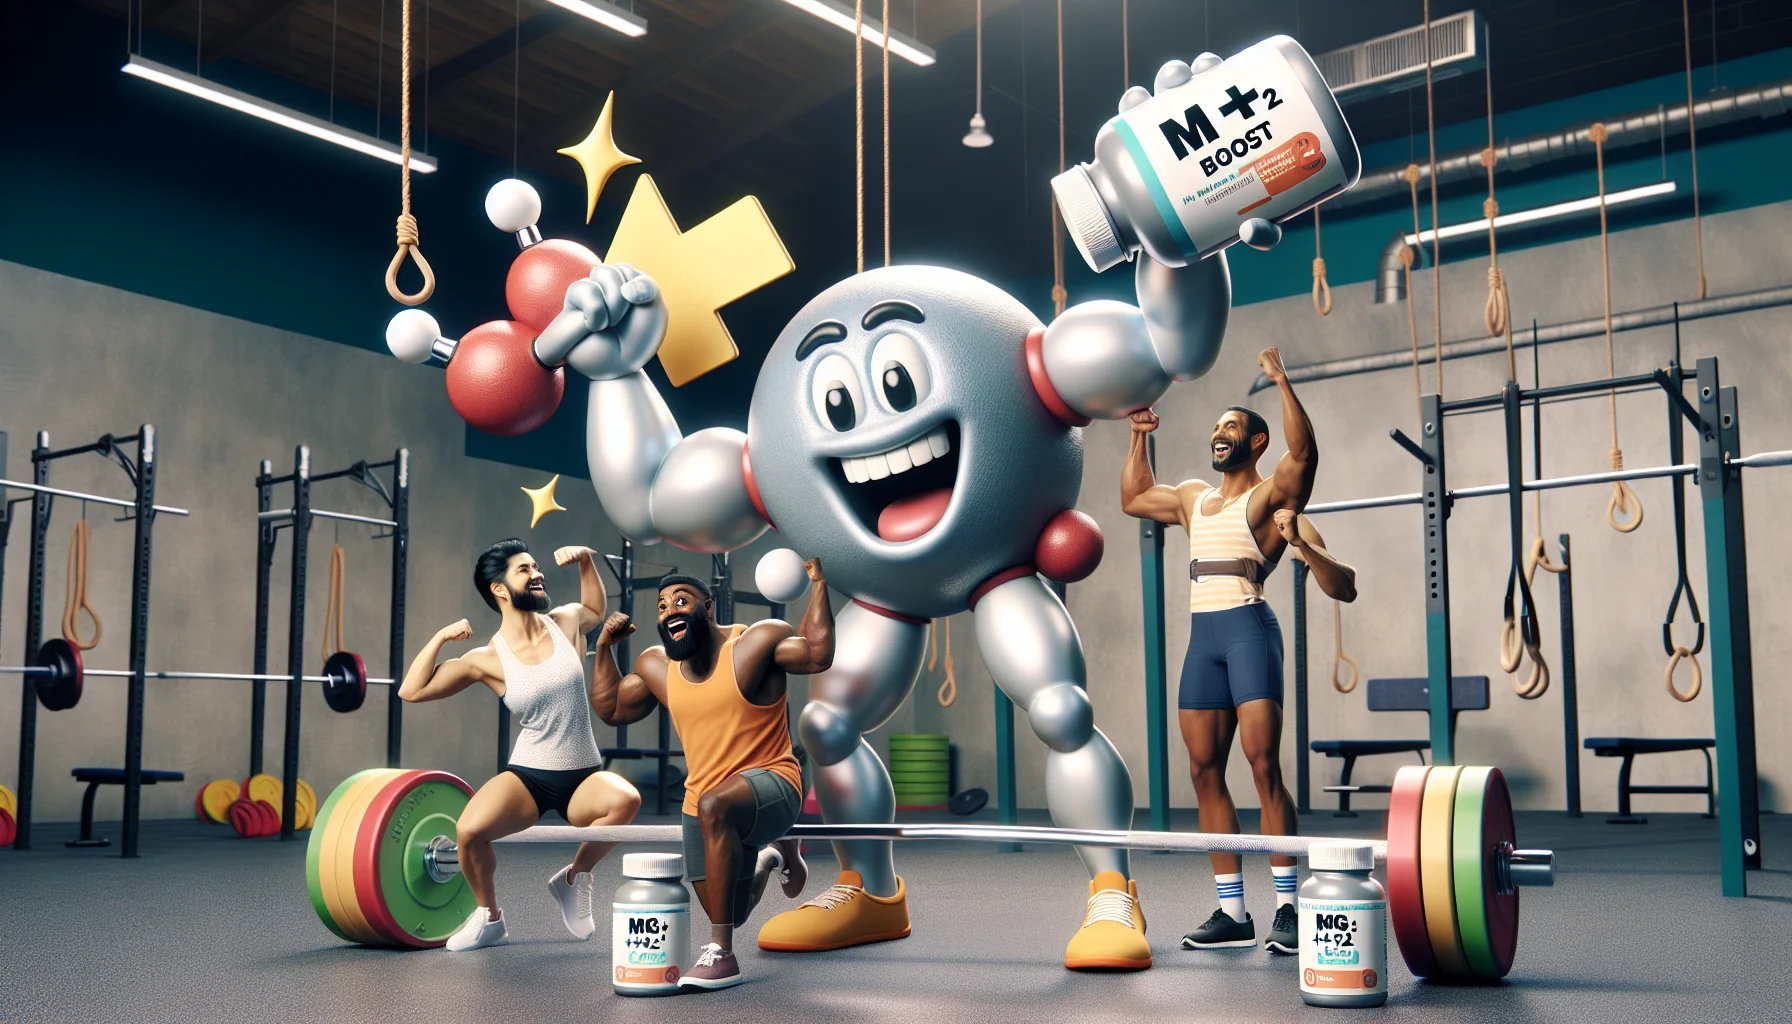 Create a humorous scene in a gym setting where athletes are reminded of the importance of magnesium. There's an enormous, comically over-exaggerated, animated 3D model of a Magnesium atom with a '+'2' popping out of it to represent its oxidation number. The atom is flexing its electrons like muscles, causing a group of diverse athletes around it, a Hispanic female weightlifter, a Black male sprinter, and a South Asian runner to laugh and cheer. They're holding dietary supplement bottles labeled 'Mg +2 Boost!' to highlight magnesium's role in sports nutrition.